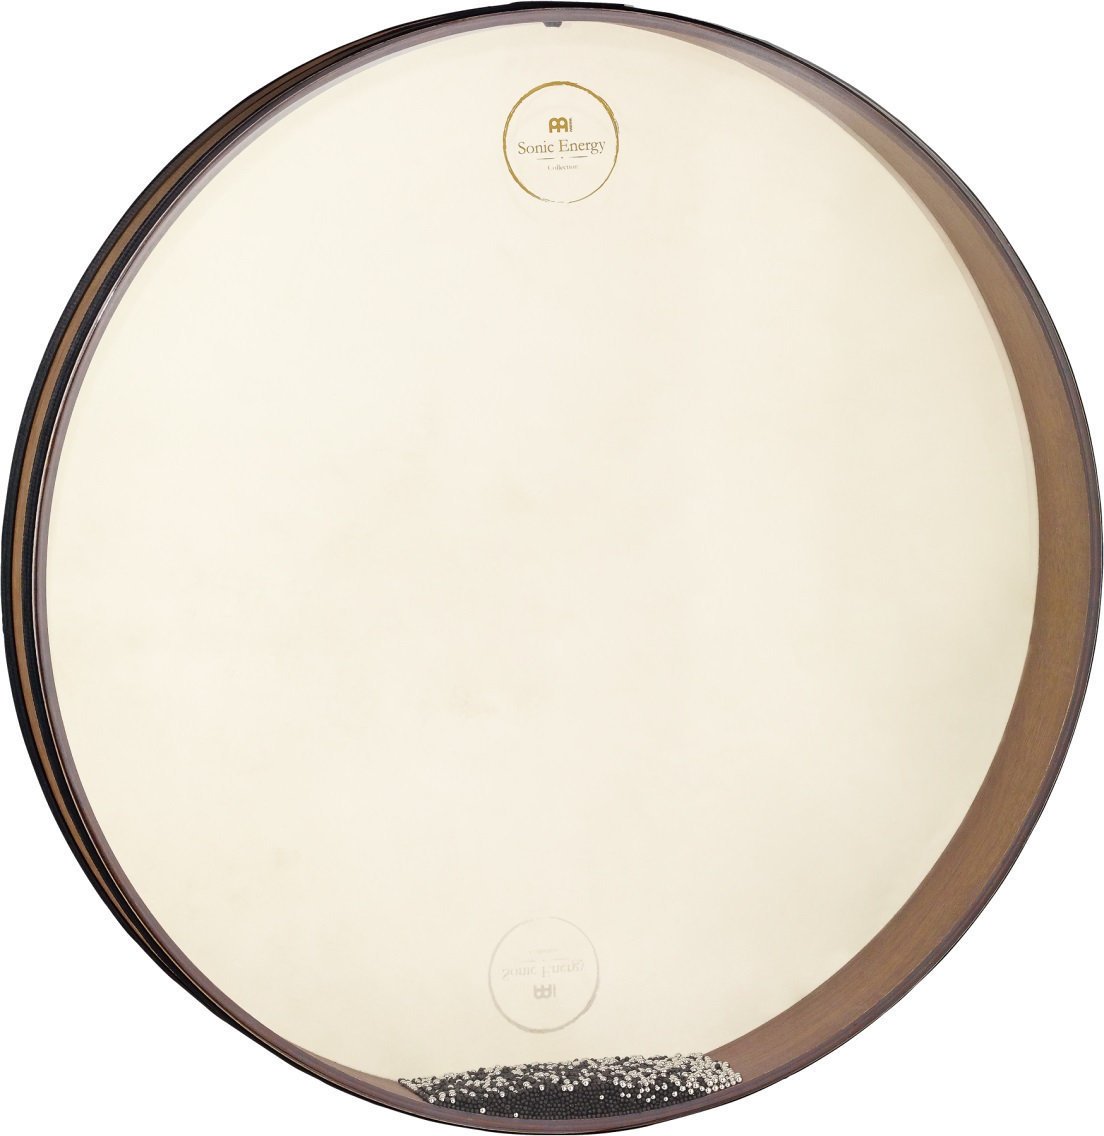 Percussion for music therapy Meinl WD22WB Sonic Energy